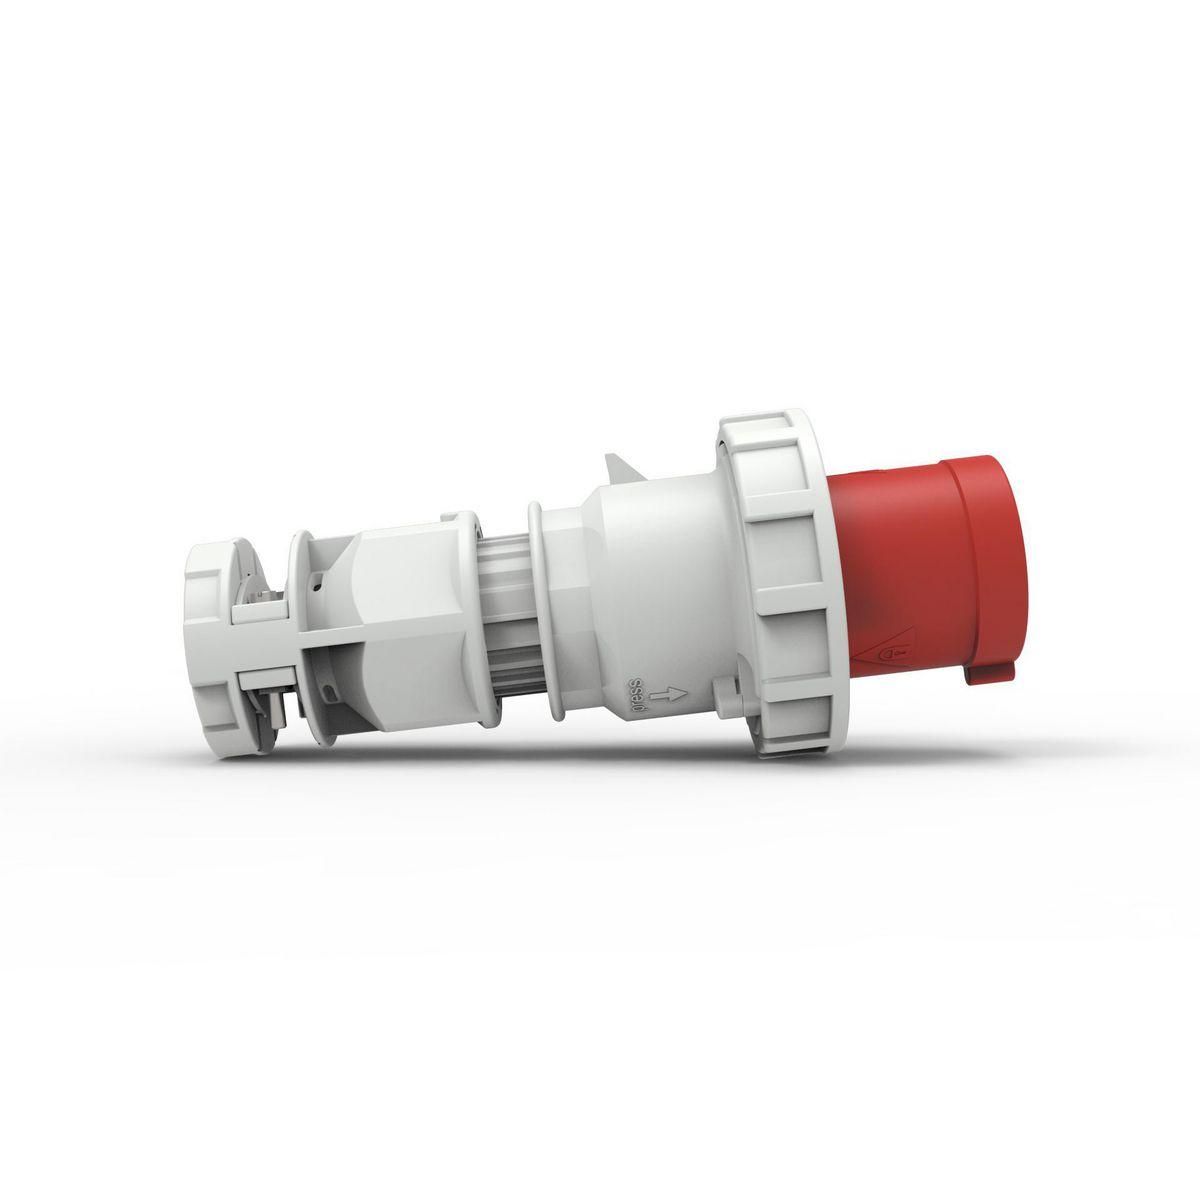 Hubbell C560P6WA Heavy Duty Products, IEC Pin and Sleeve Devices, Hubbell-PRO, Male, Plug, 60/63 A  200-415 VAC, 4-POLE 5-WIRE, Red, Watertight  ; IP67 environmental ratings ; Impact and corrosion resistant insulated non-metallic housing ; Sequential contact engagement to